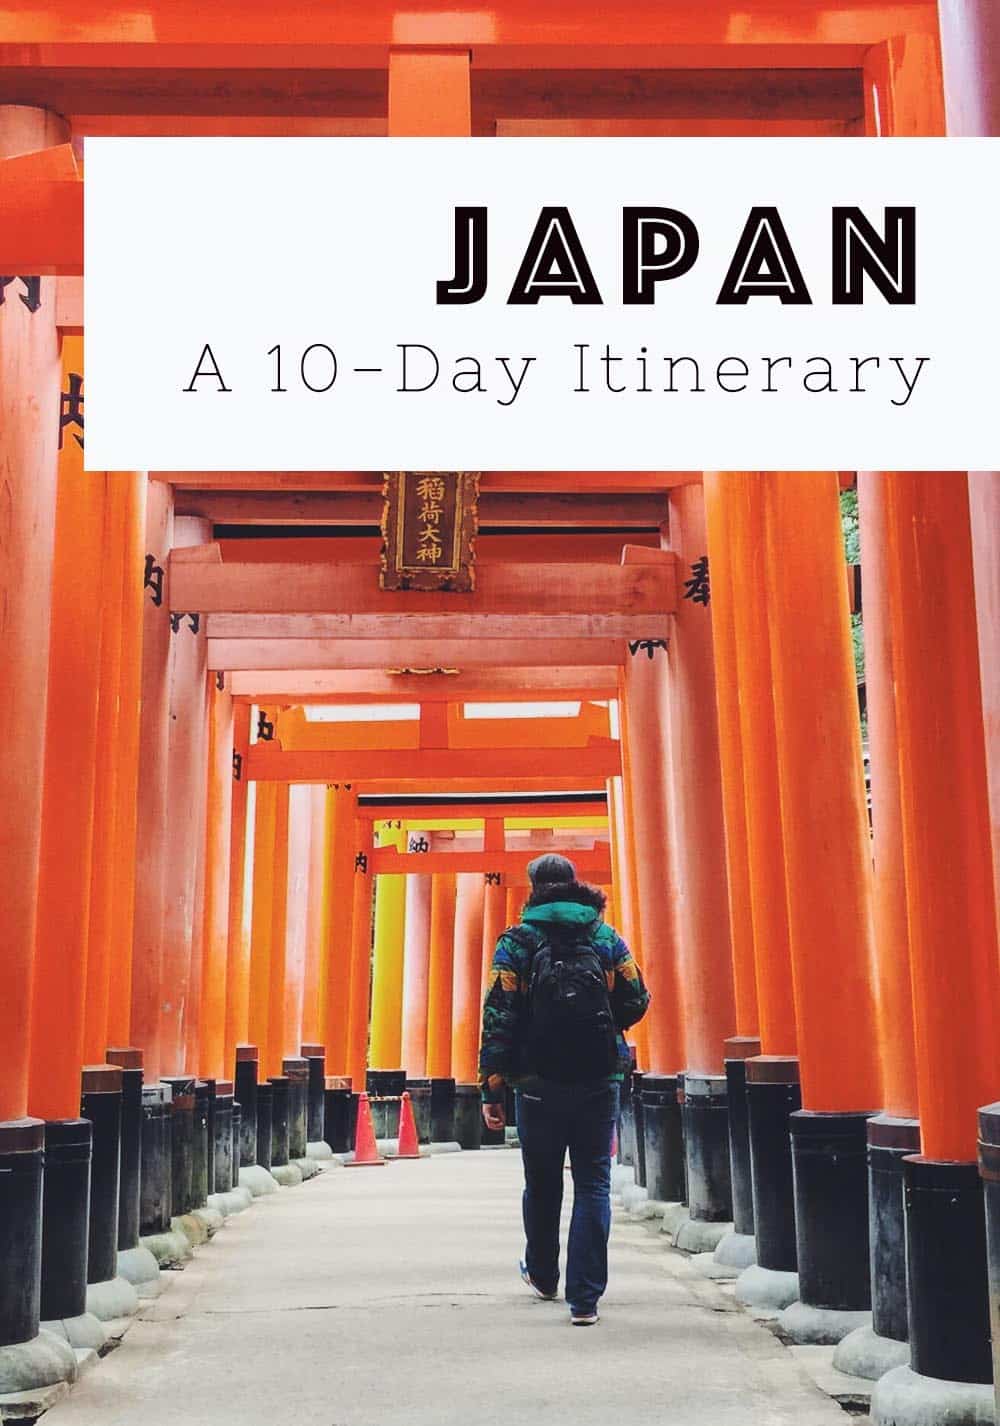 A 10-day Japan itinerary – including things to do, accommodation, and vegetarian-friendly restaurants.